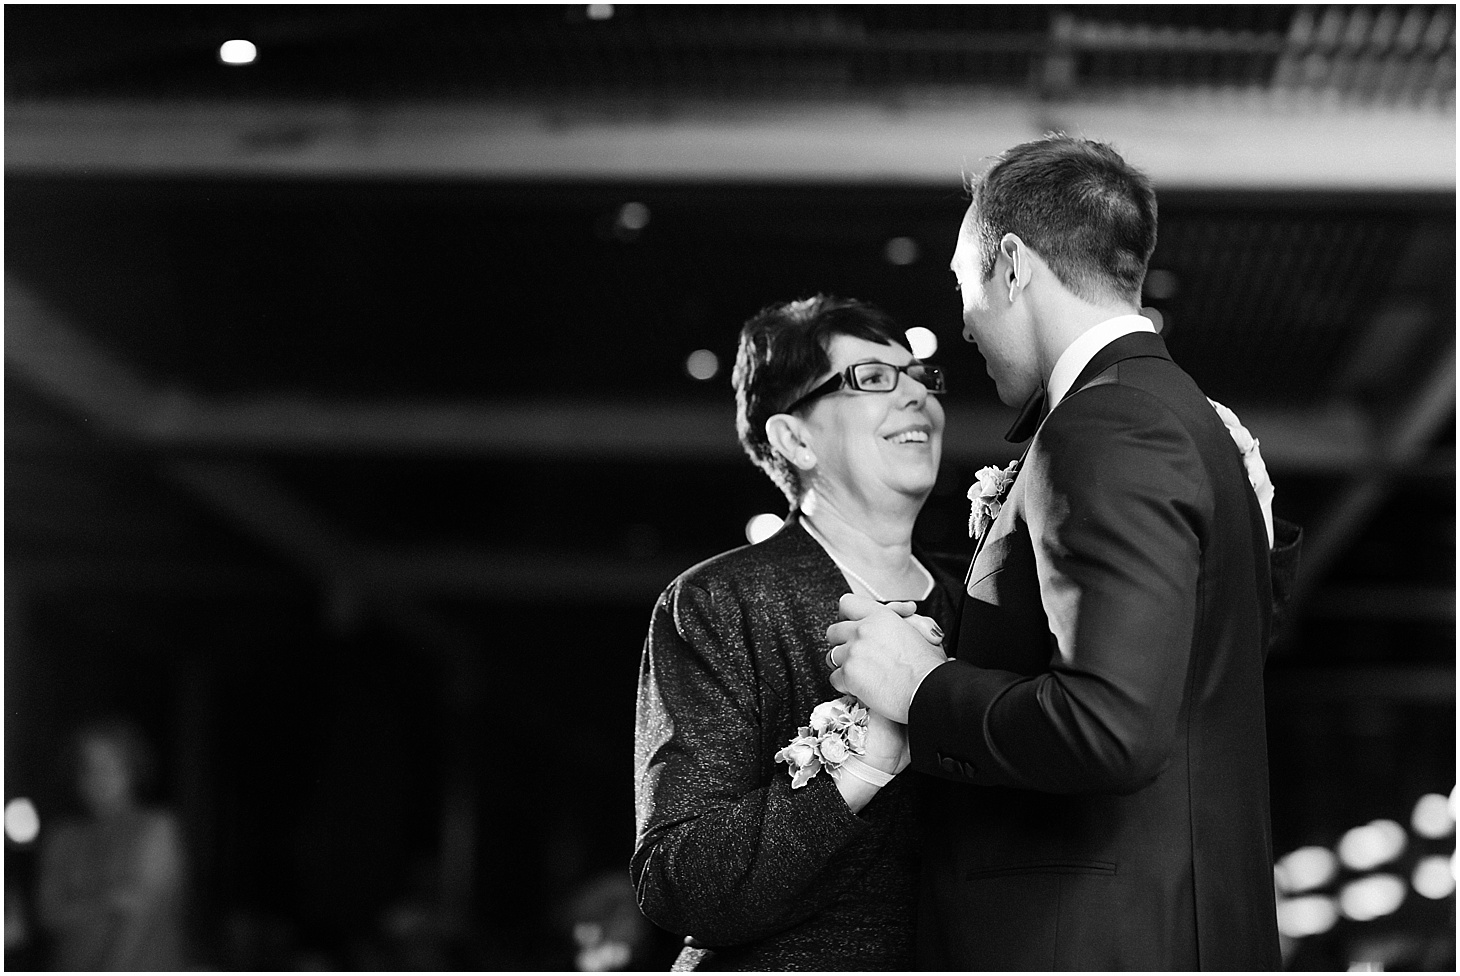 Mother-Son Dance | Wedding Reception at District Winery | Chic and Modern Interfaith Wedding in Washington, DC | Sarah Bradshaw Photography